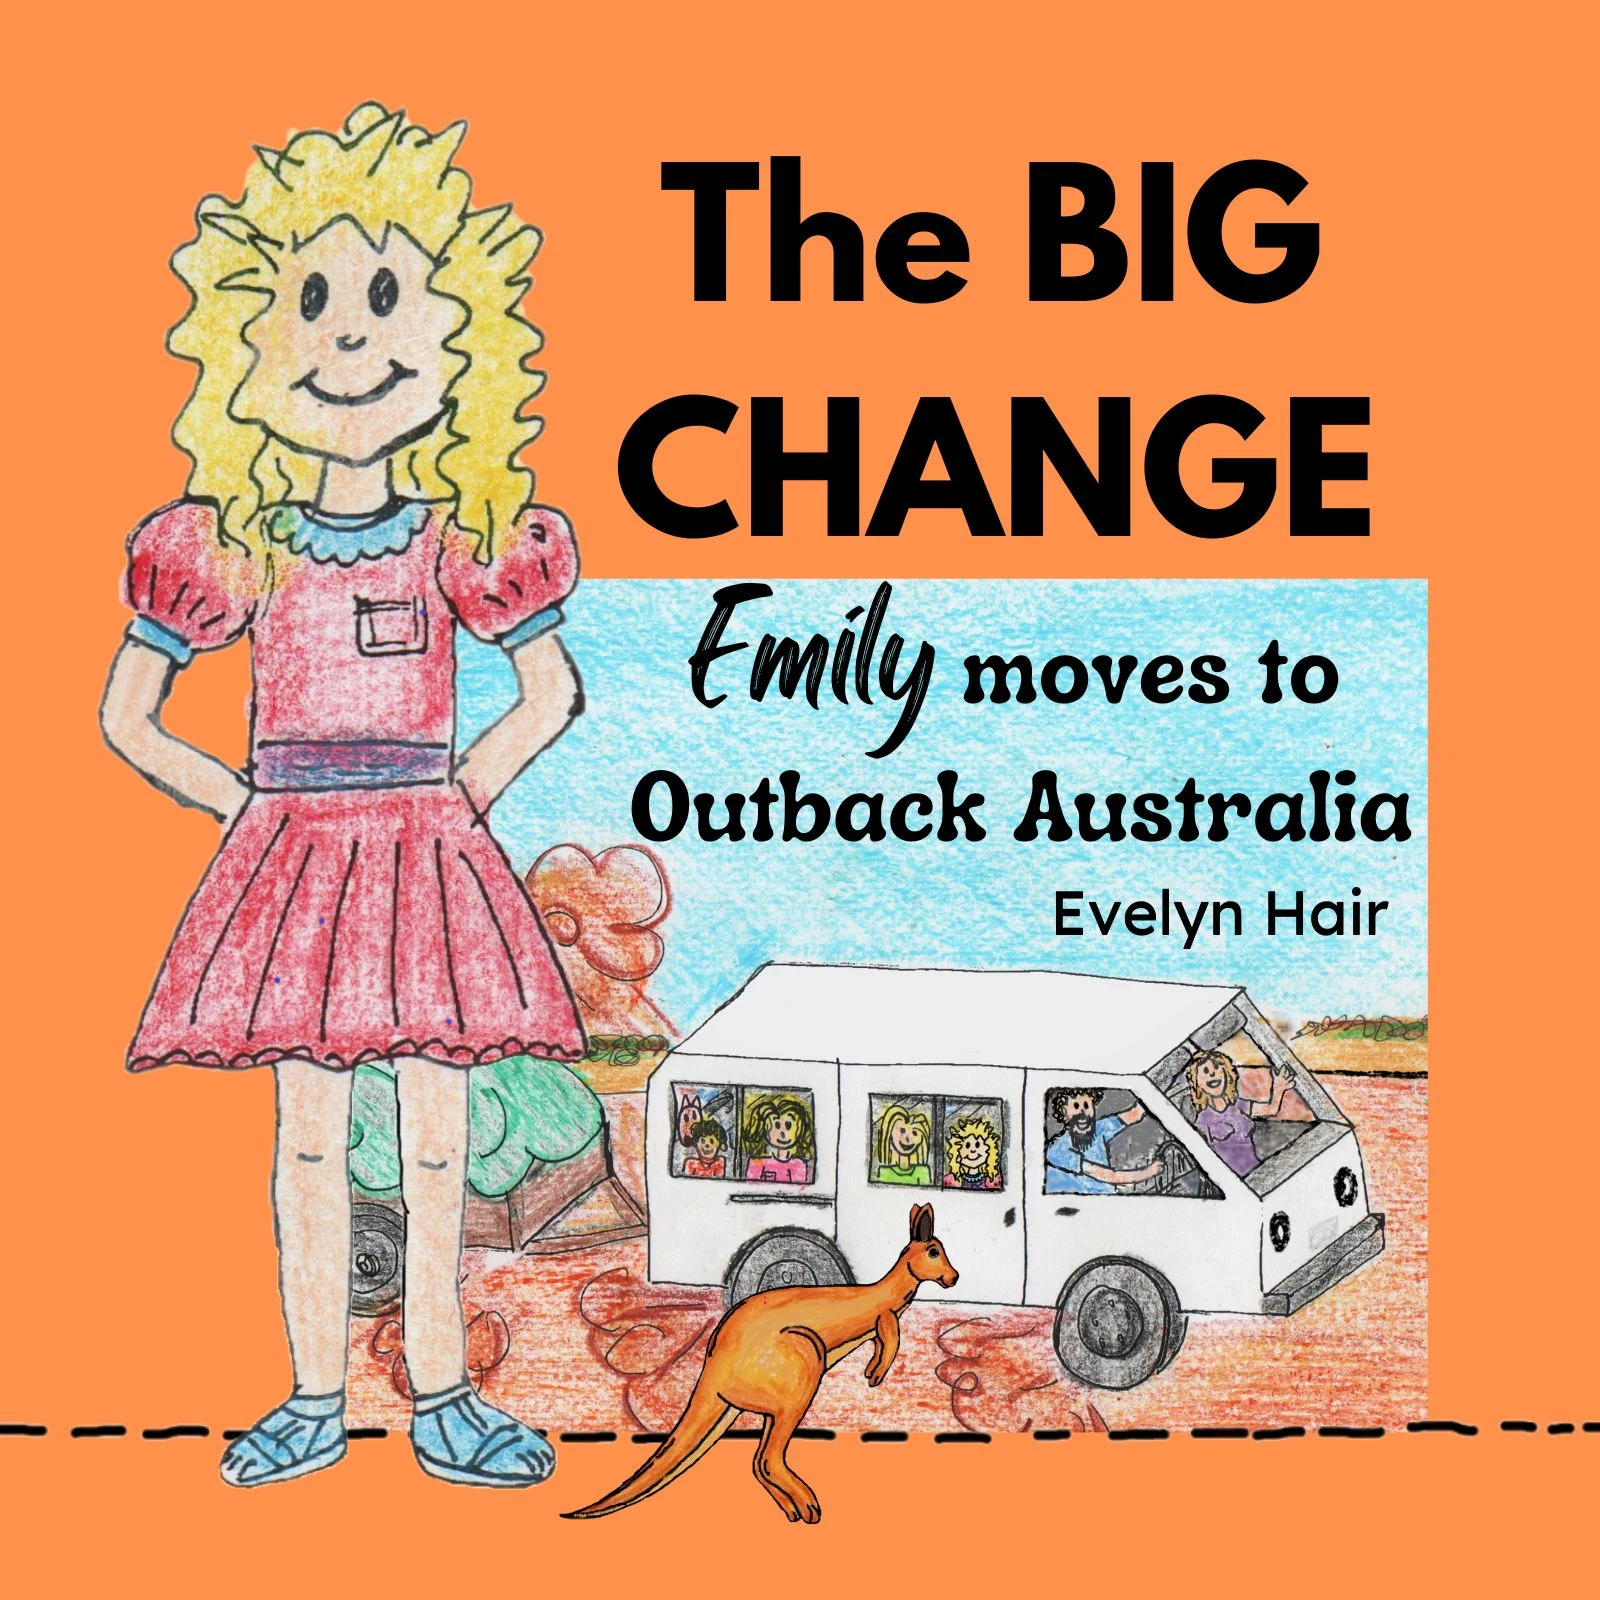 The BIG CHANGE: Emily moves to Outback Australia